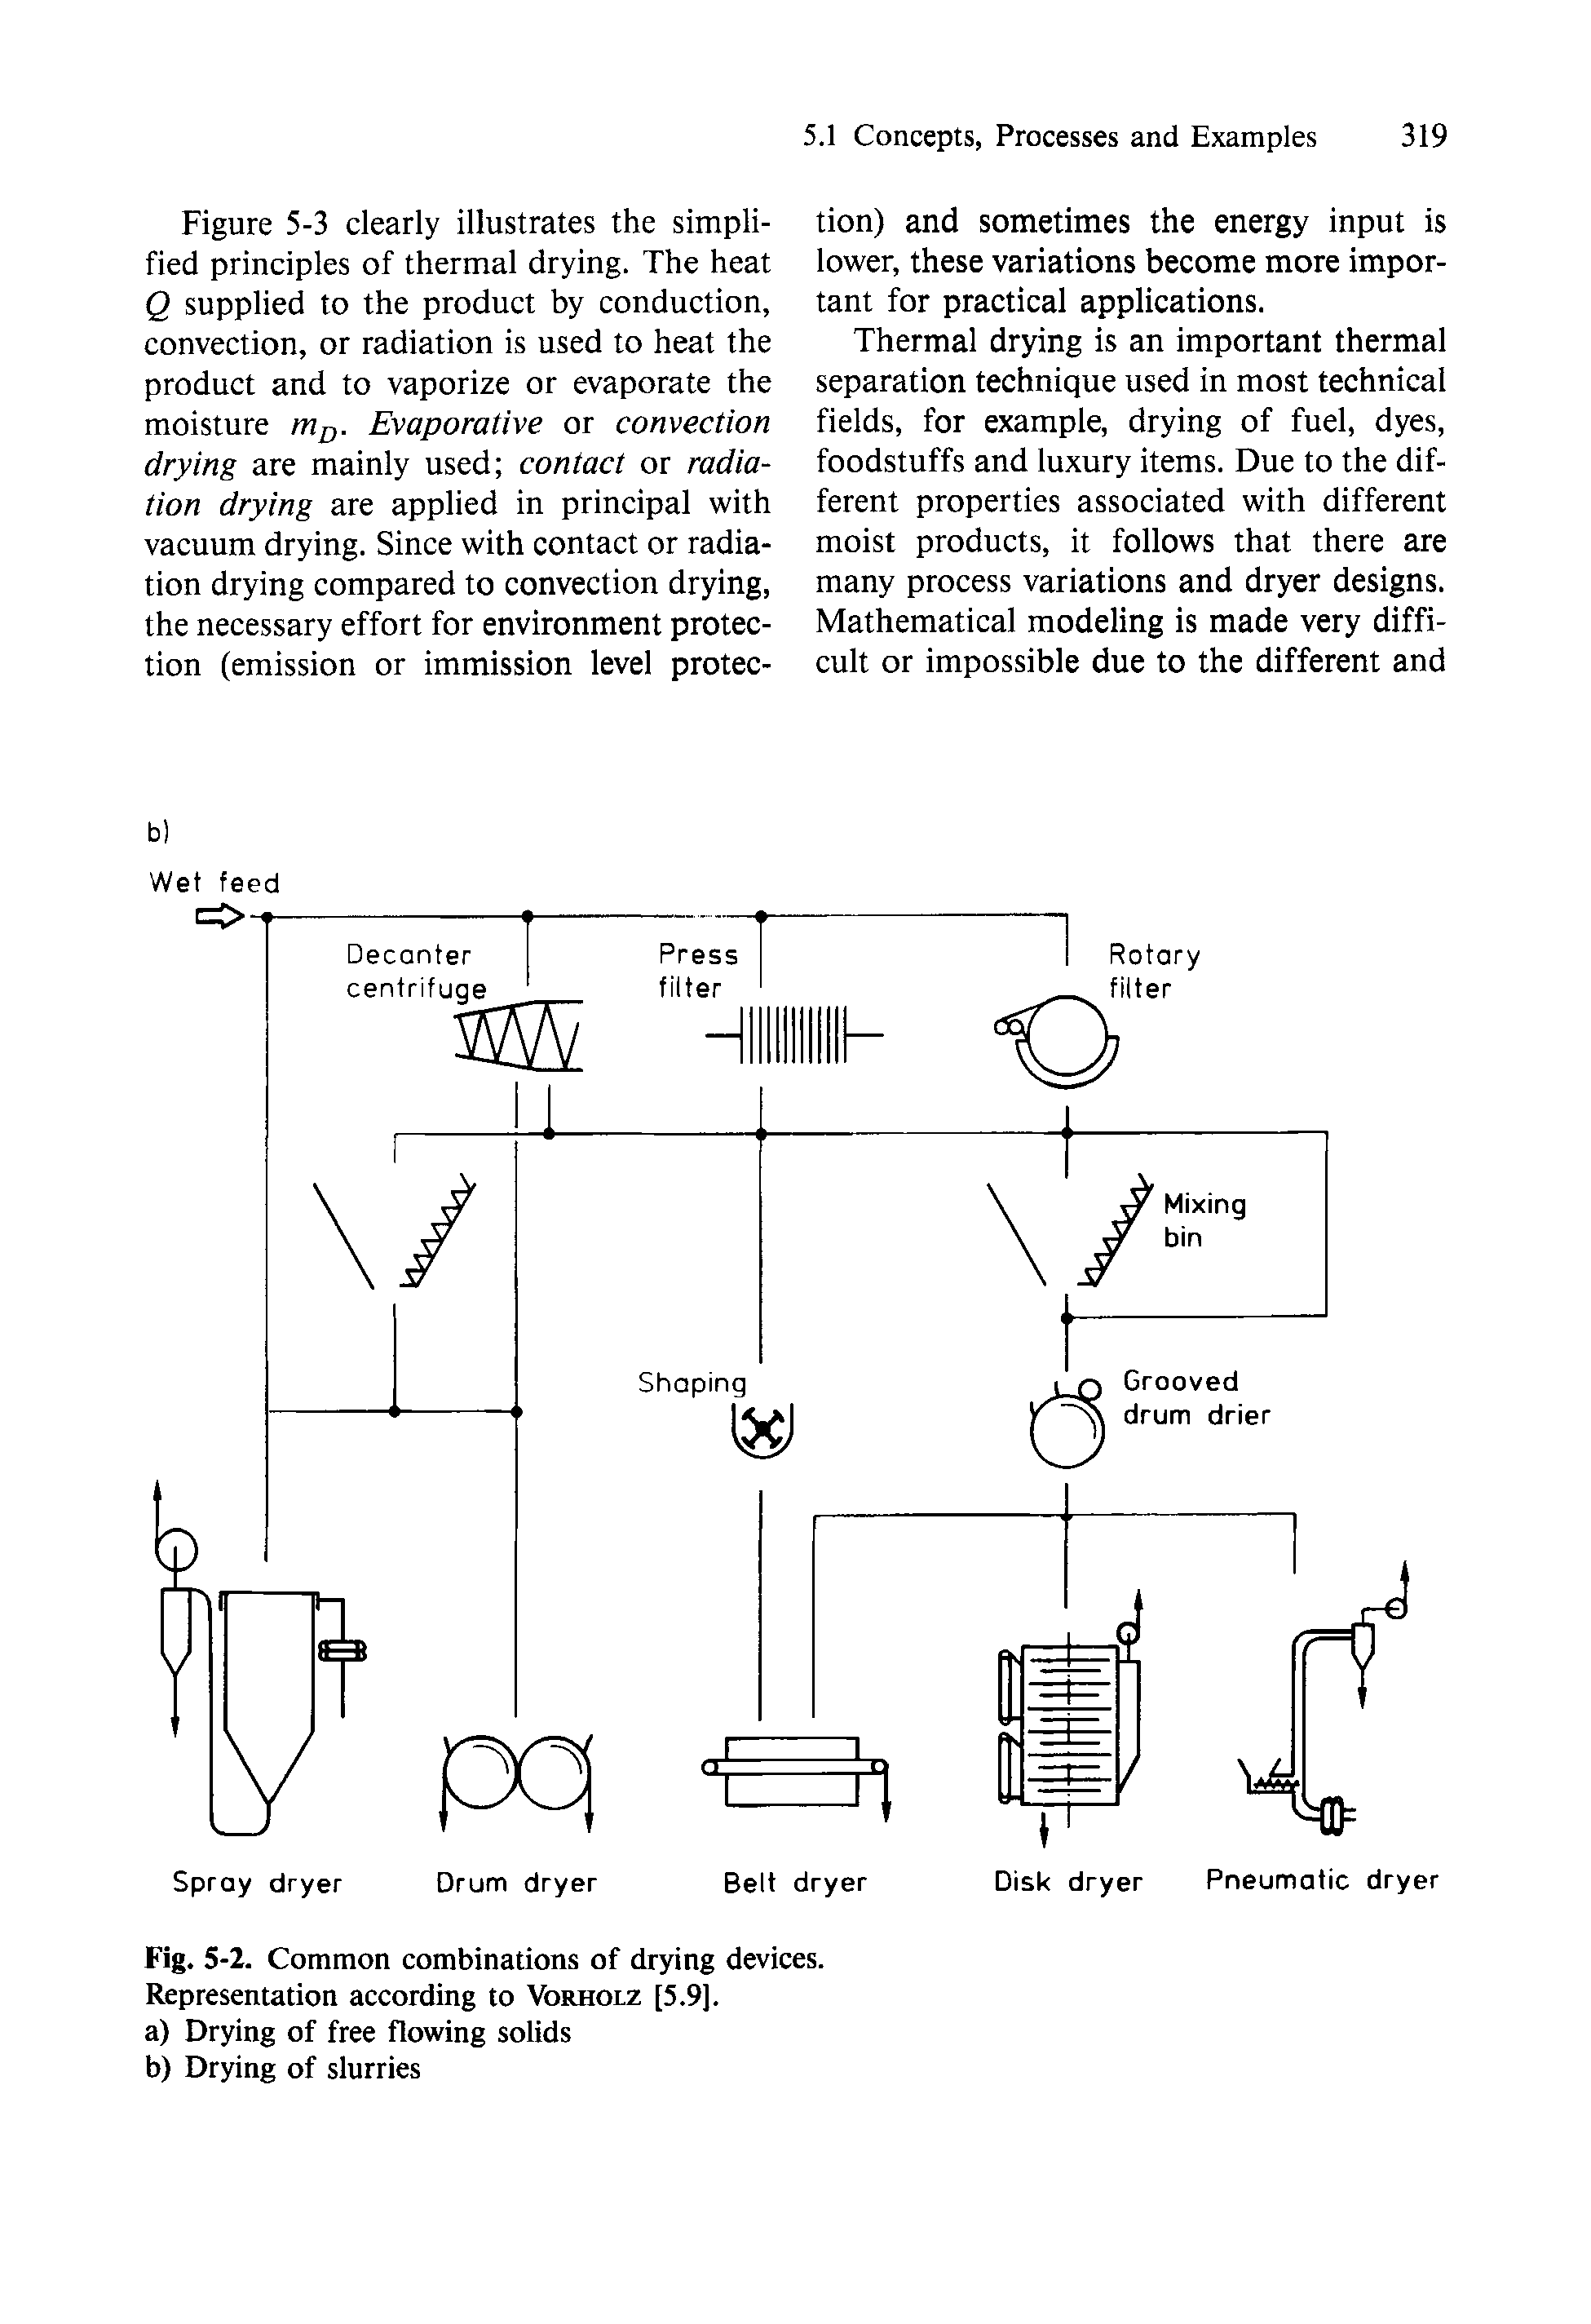 Fig. 5-2. Common combinations of drying devices. Representation according to Vorholz [5.9].